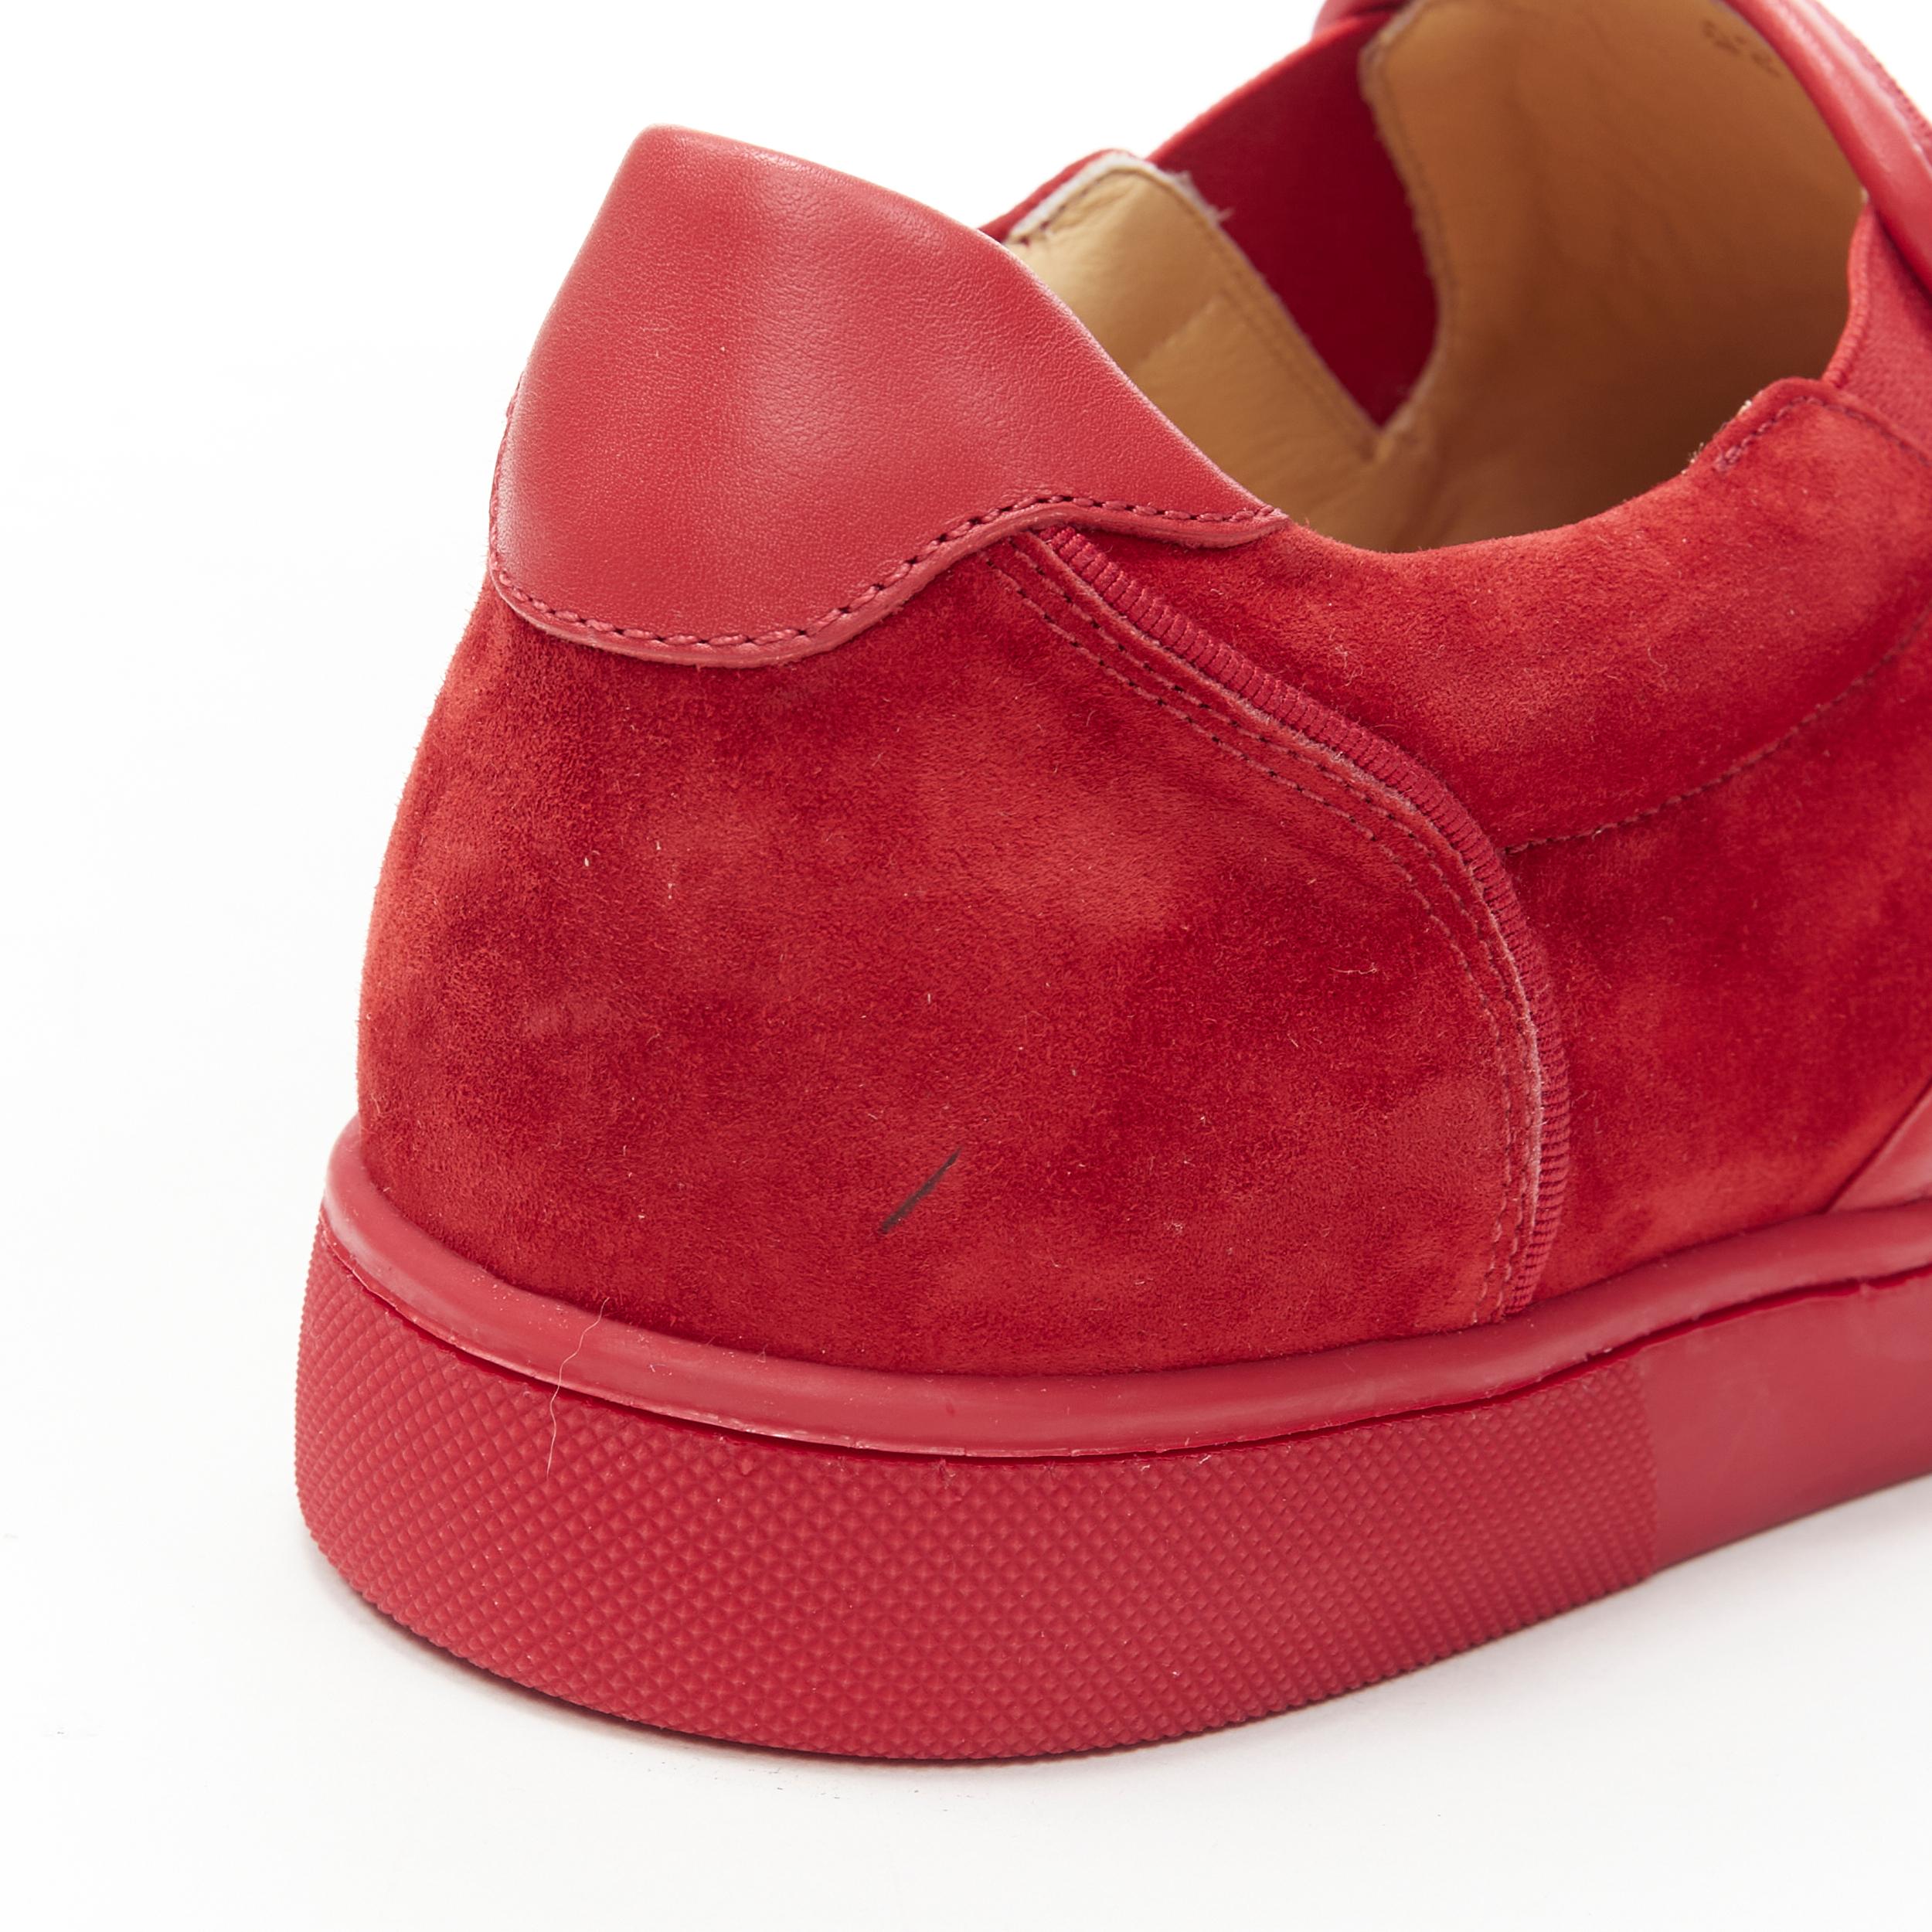 new CHRISTIAN LOUBOUTIN Sailor Boat red suede degrade strass low sneaker EU42 For Sale 2